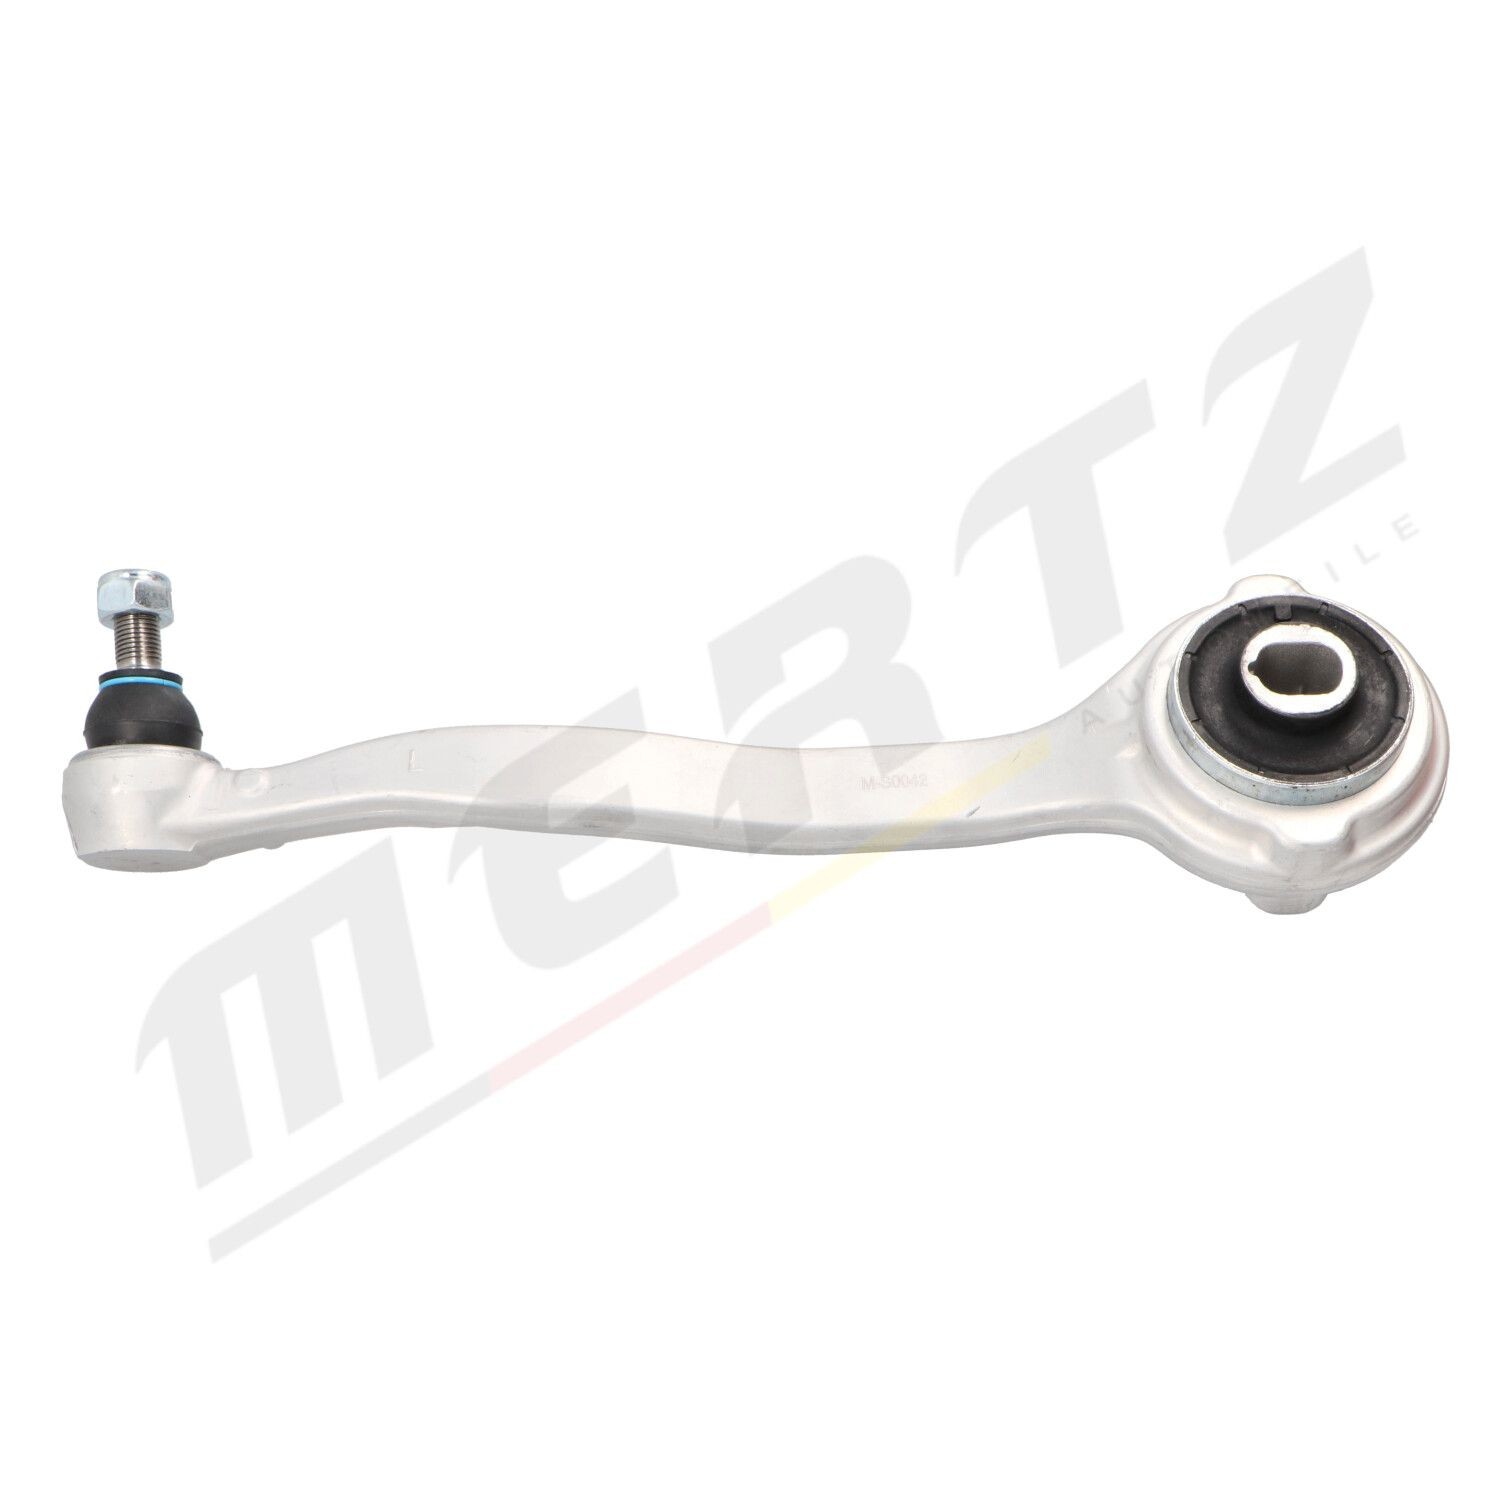 MERTZ Control arms rear and front Mercedes CL203 new M-S0042